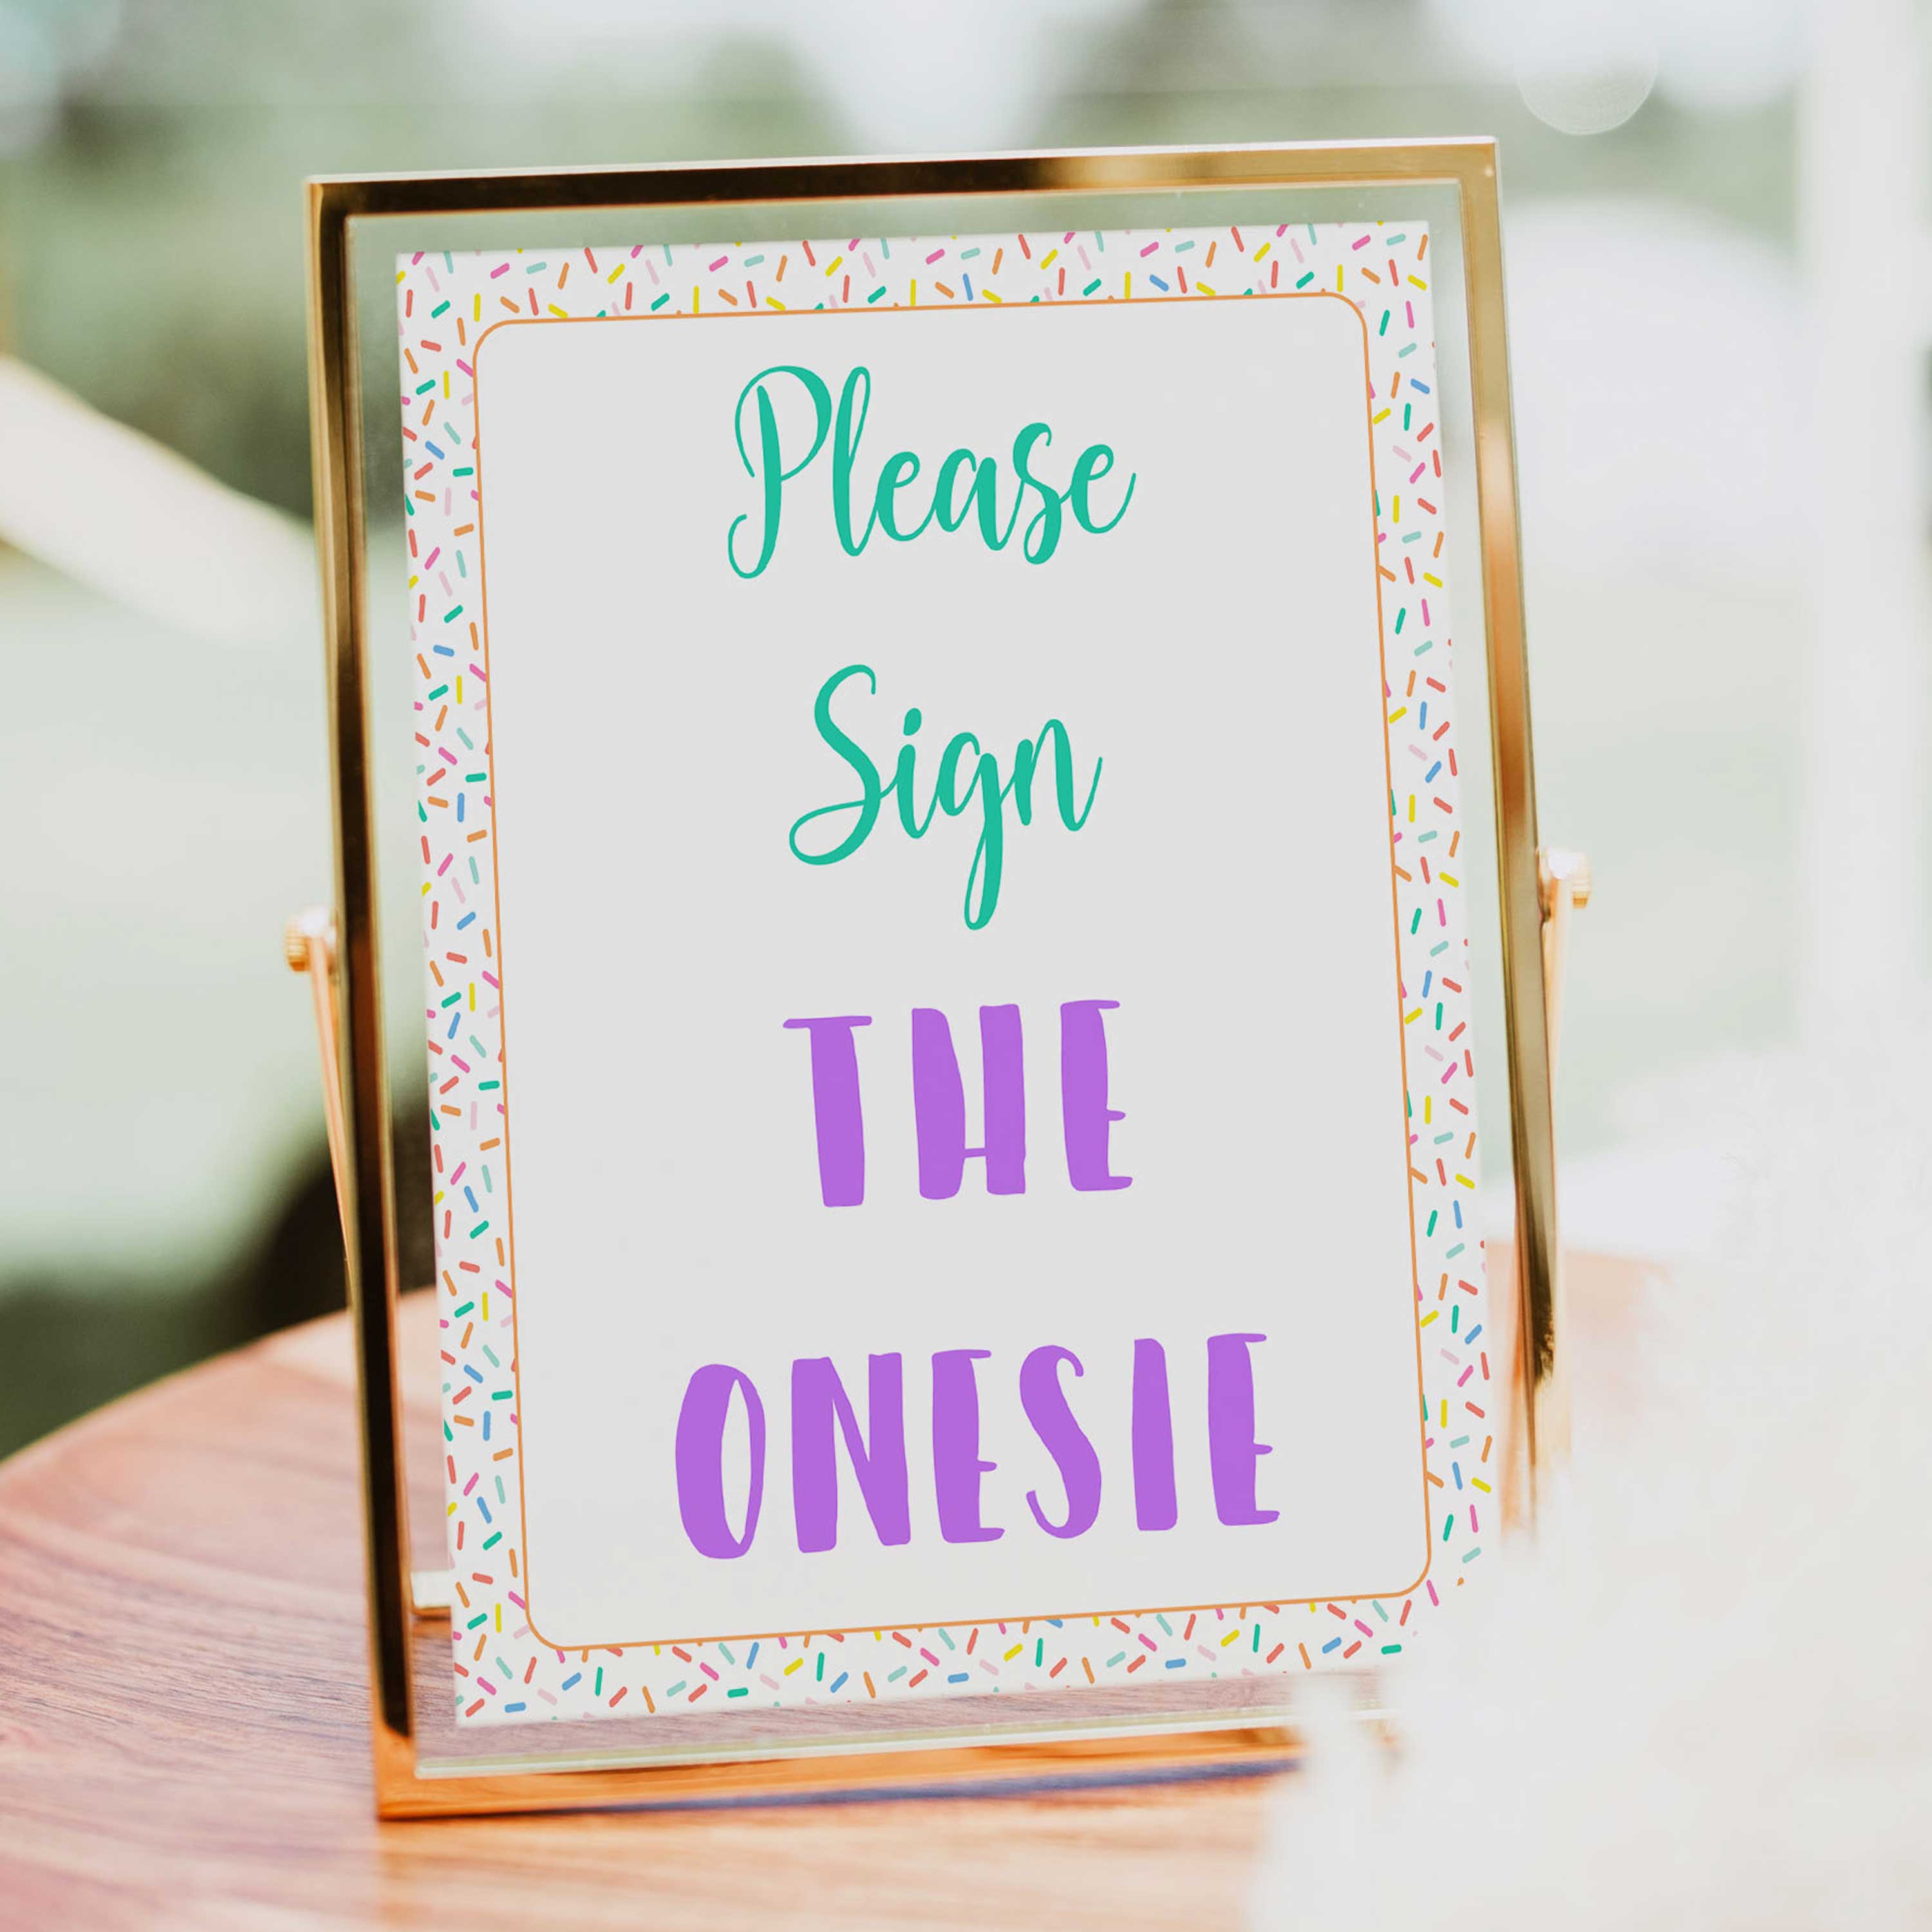 Please sign the onesie, Printable baby shower games, baby sprinkle fun baby games, baby shower games, fun baby shower ideas, top baby shower ideas, sprinkle shower baby shower, friends baby shower ideas